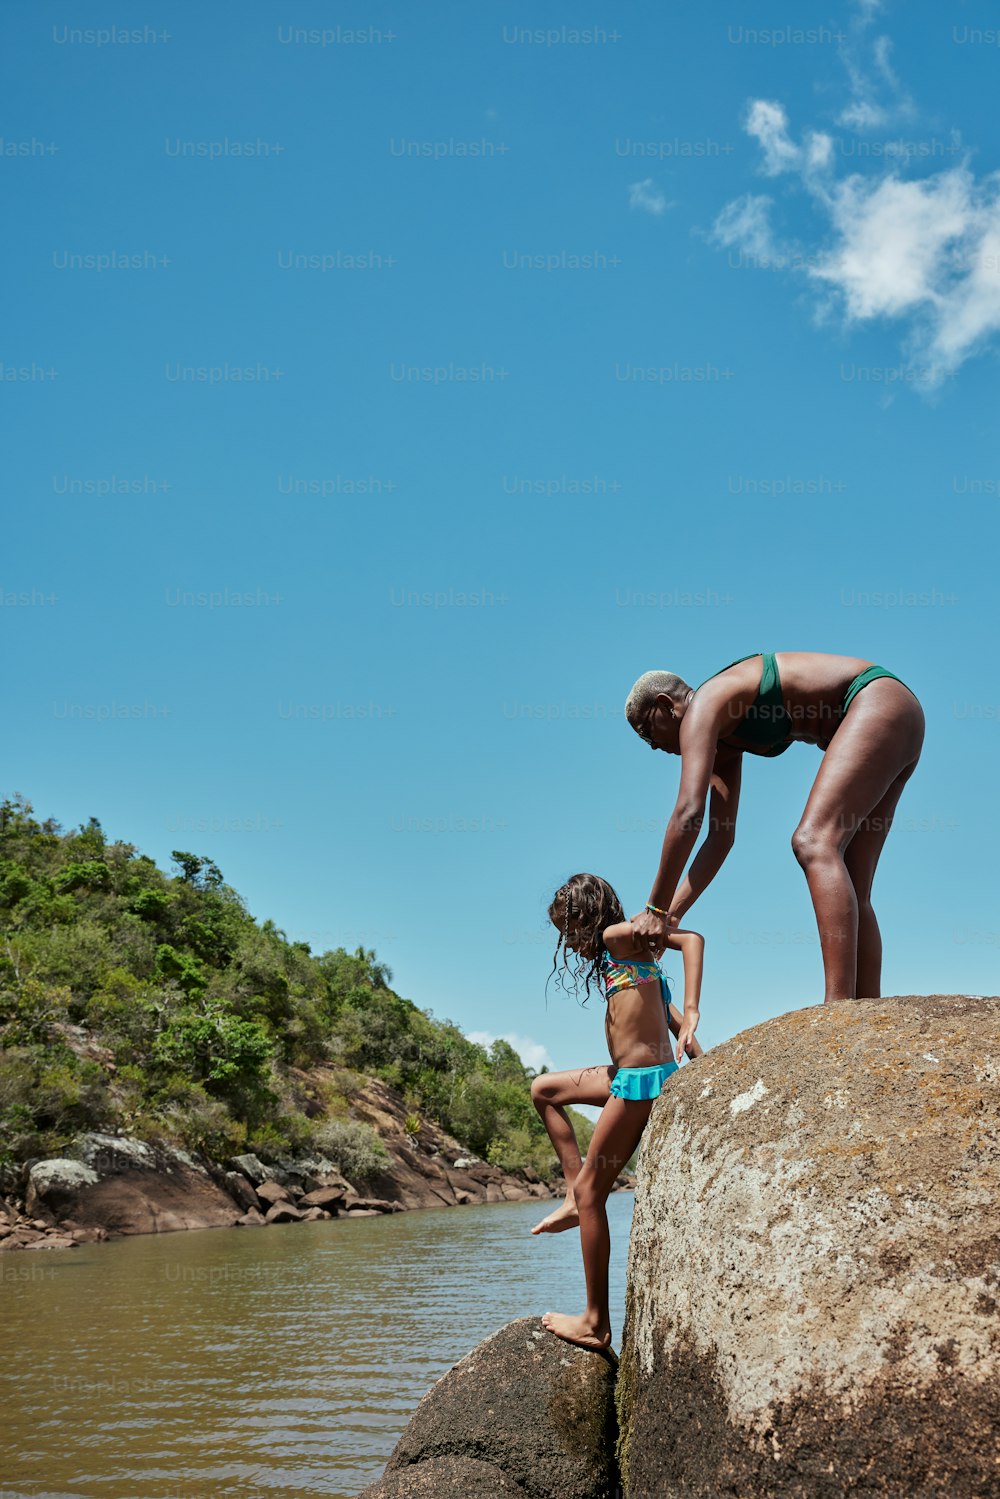 a woman and a child standing on a rock by a body of water